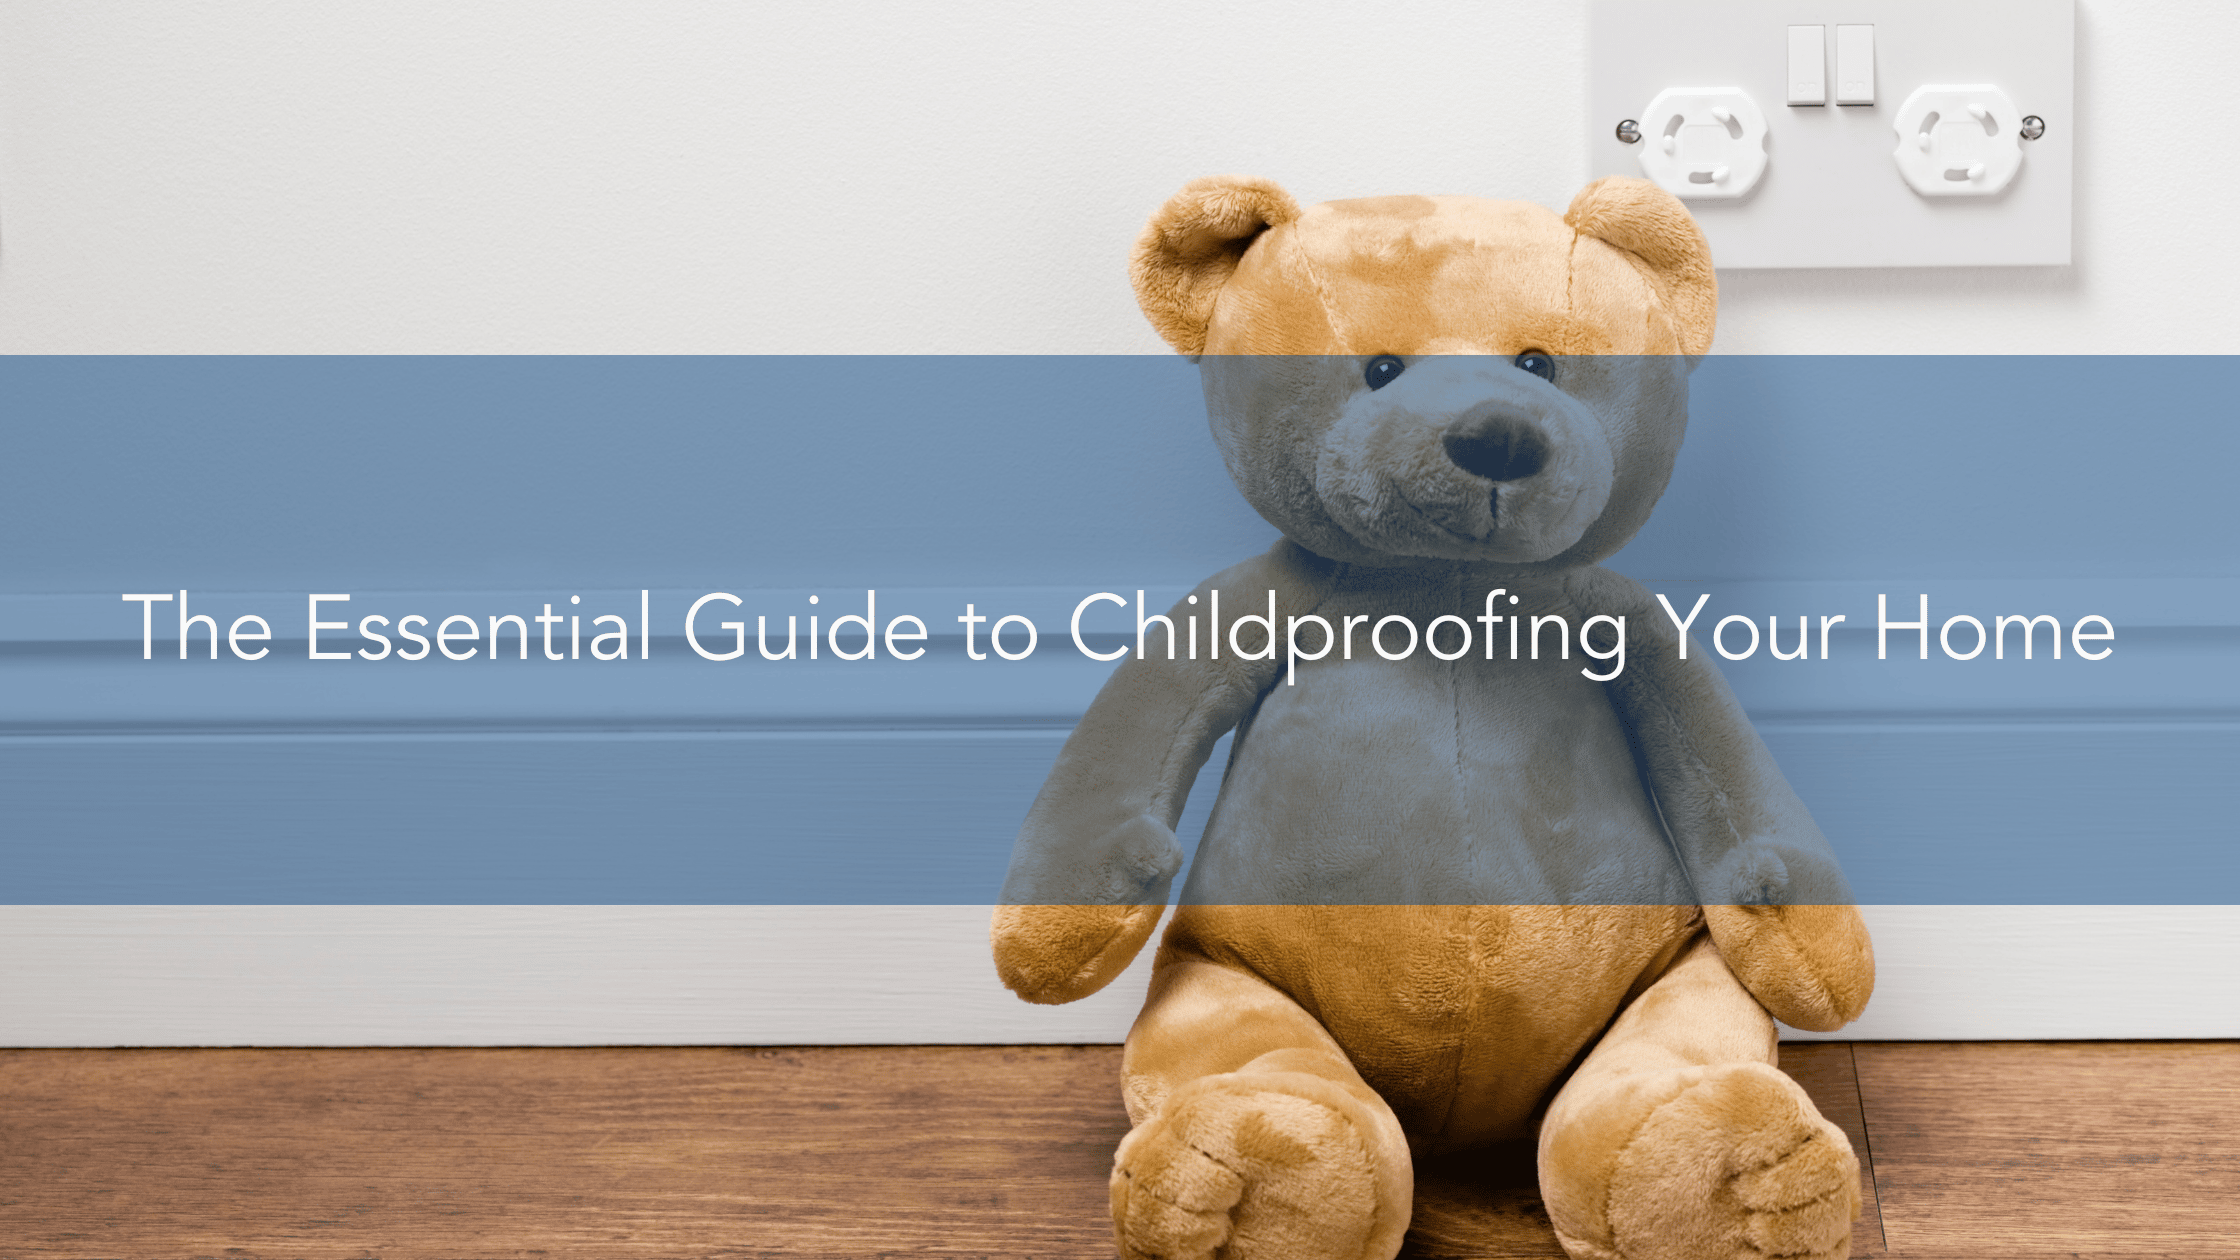 The Essential Guide to Childproofing Your Home